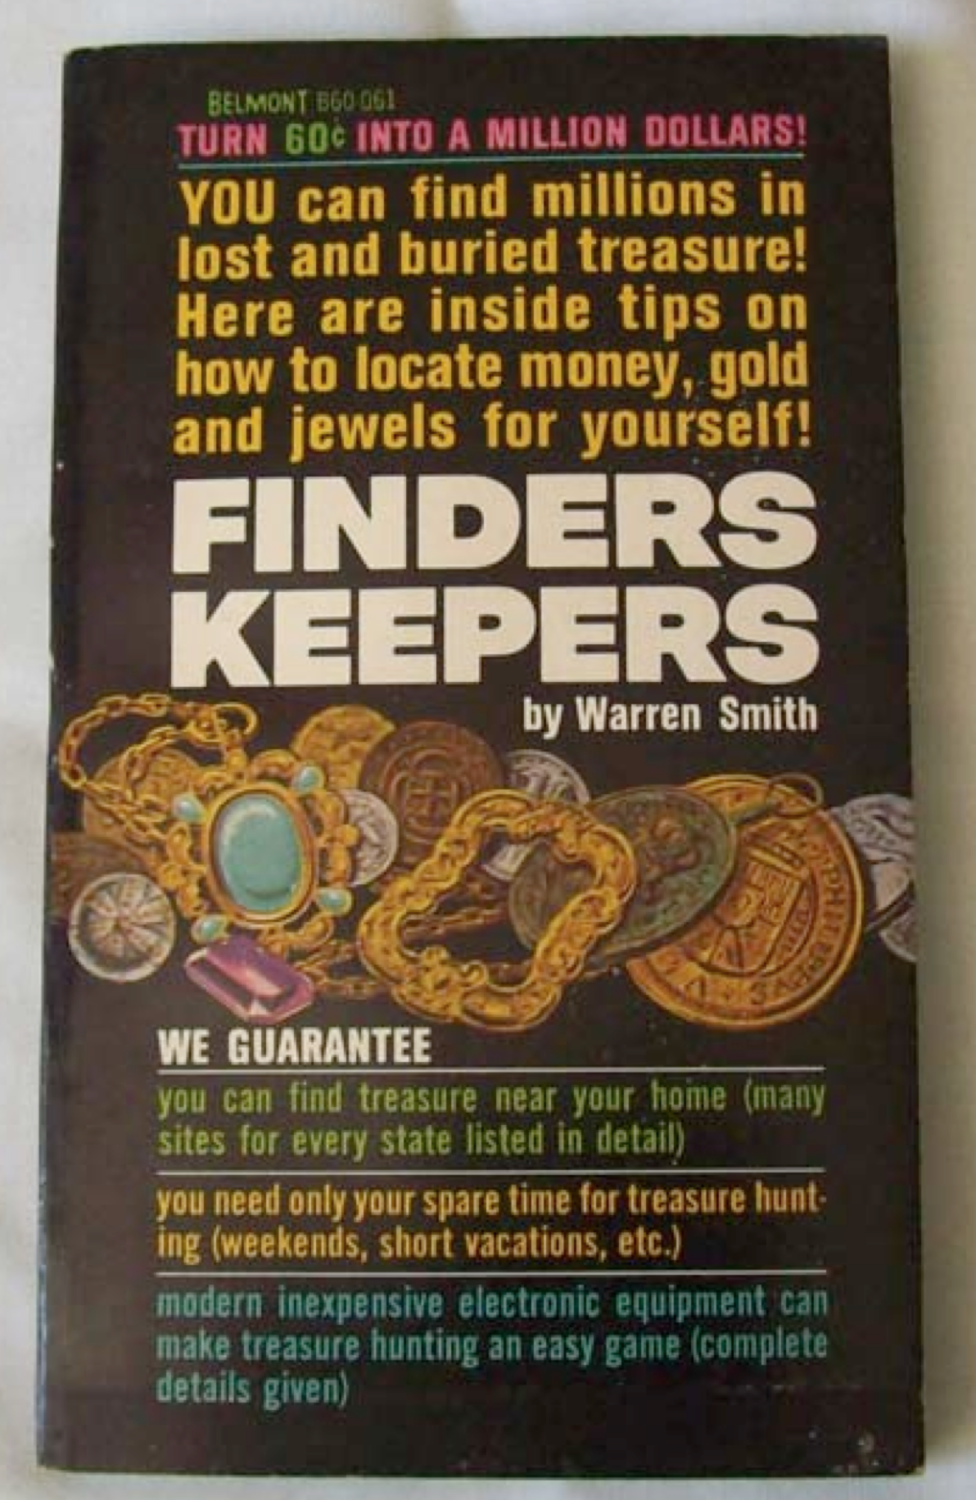 FINDERS KEEPERS by Warren Smith